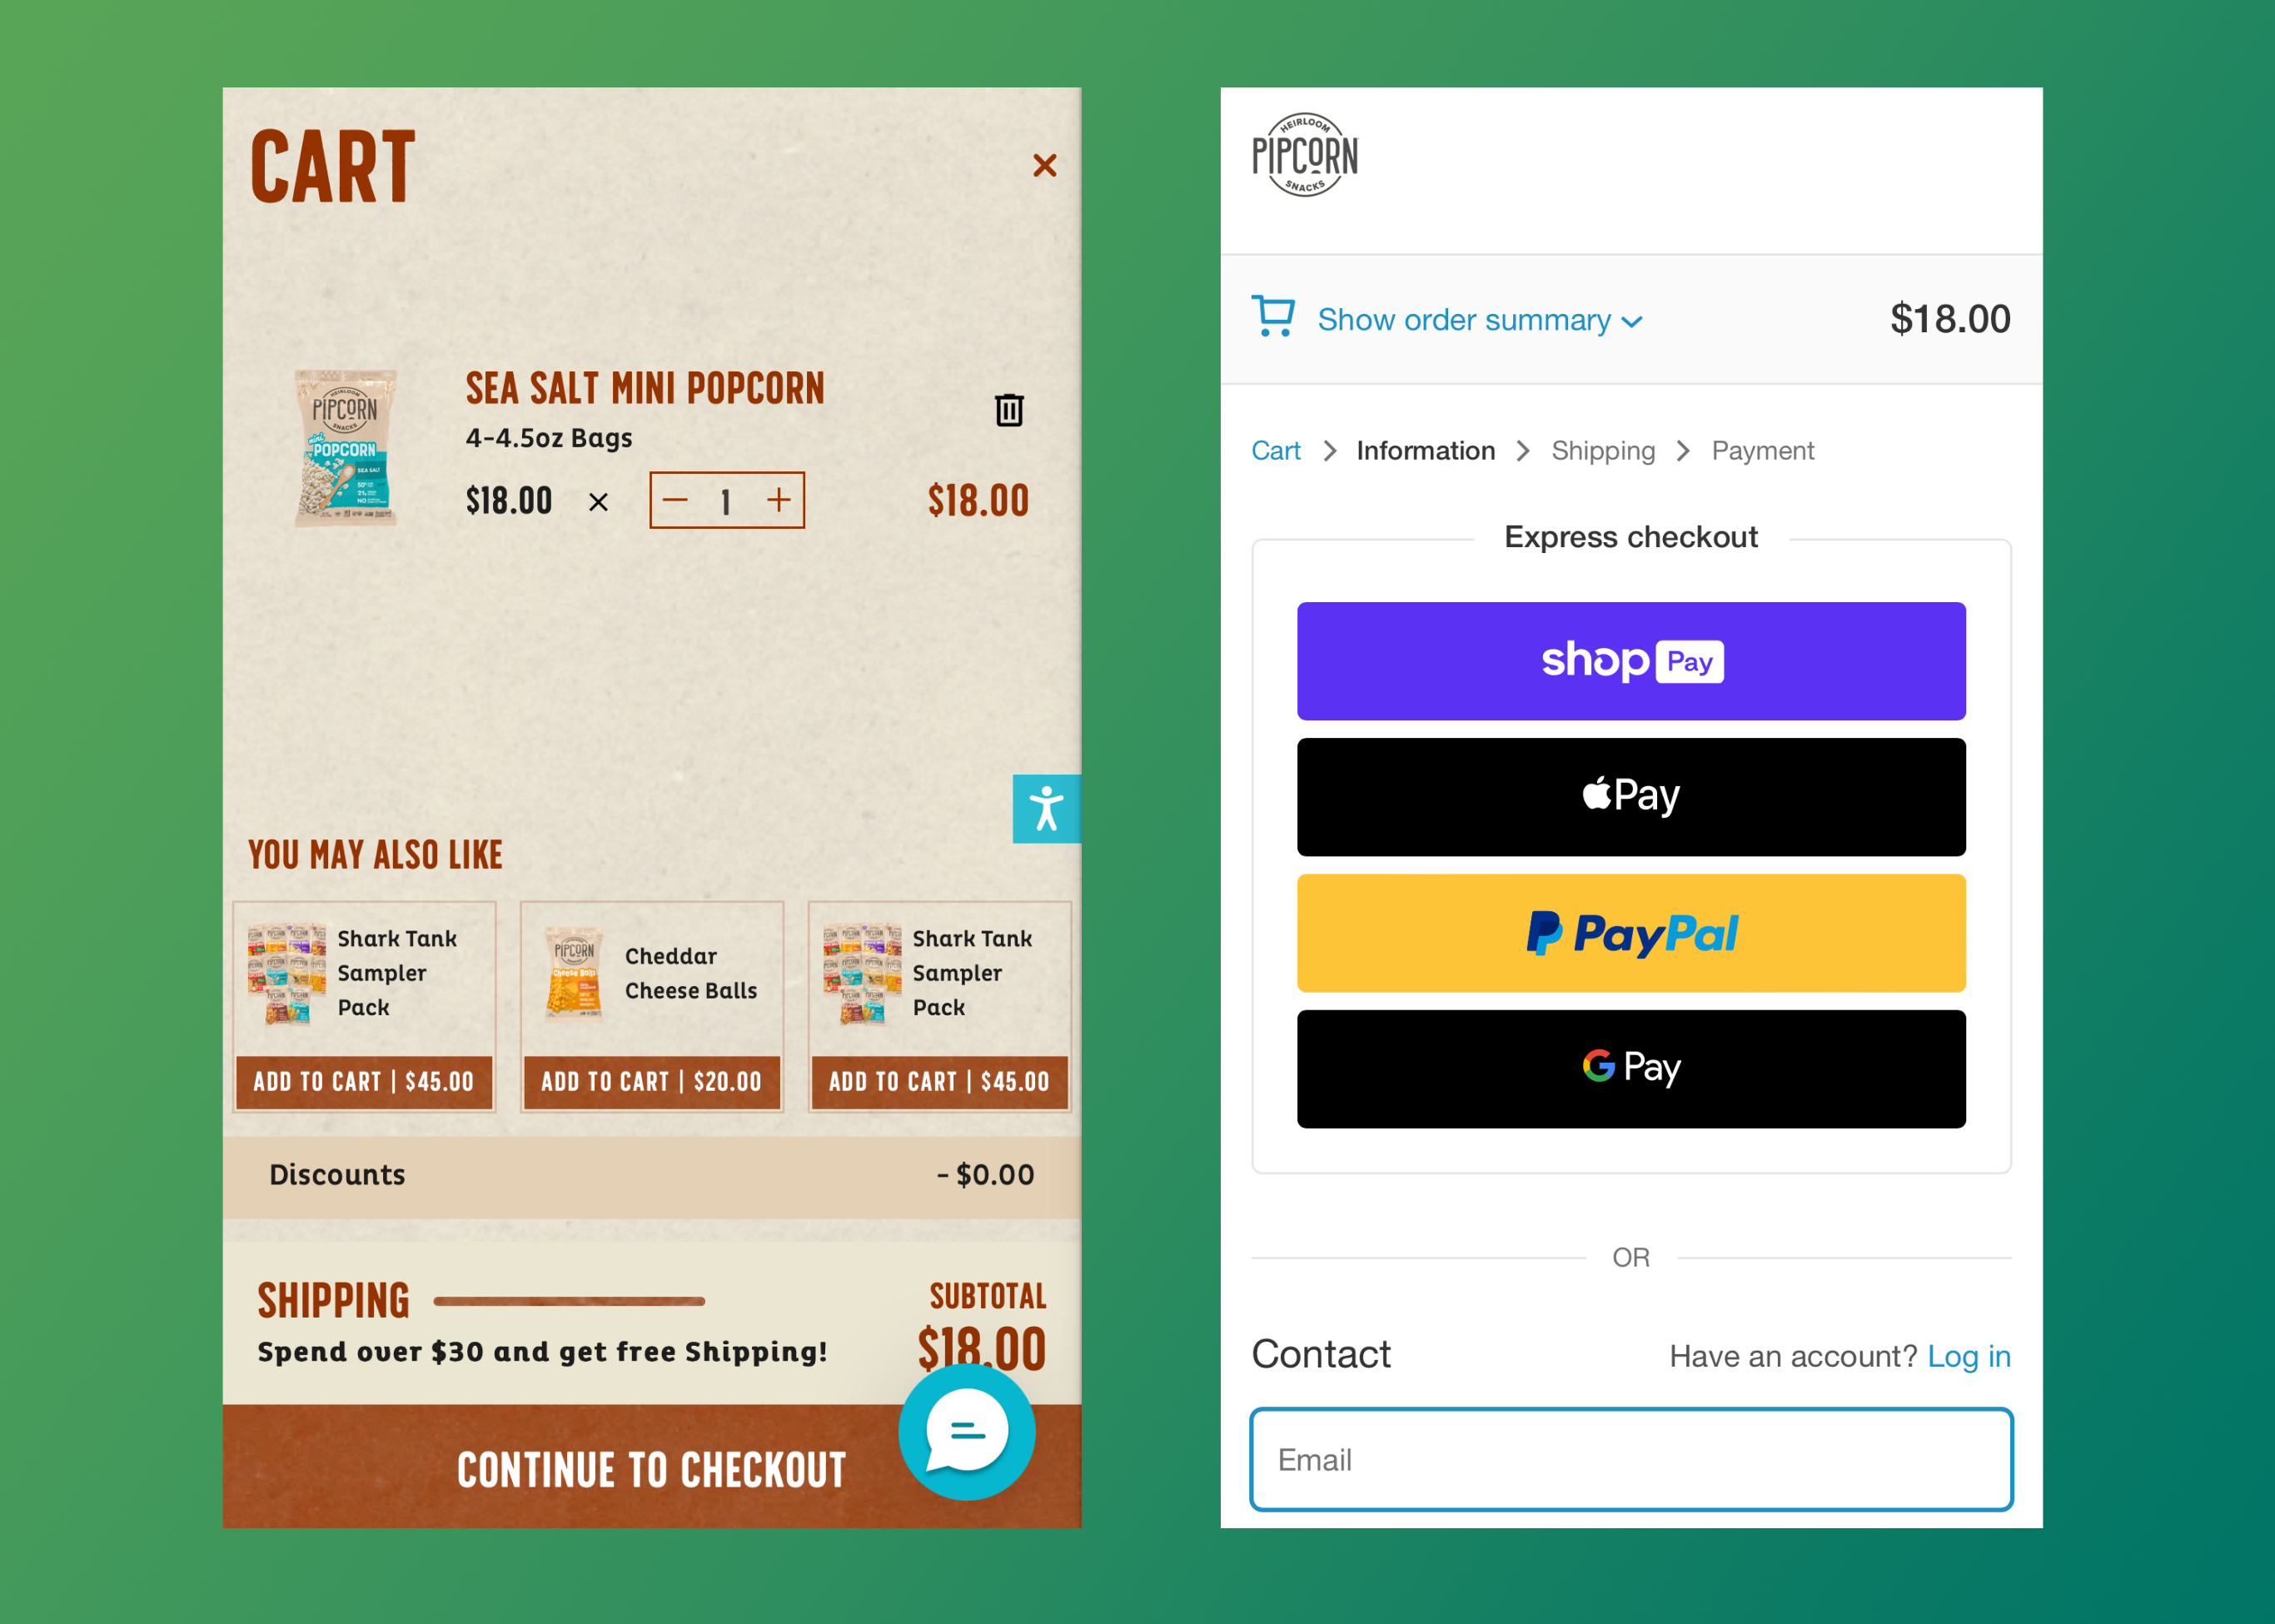 Checkout page for Pipcorn's mobile ecommerce site